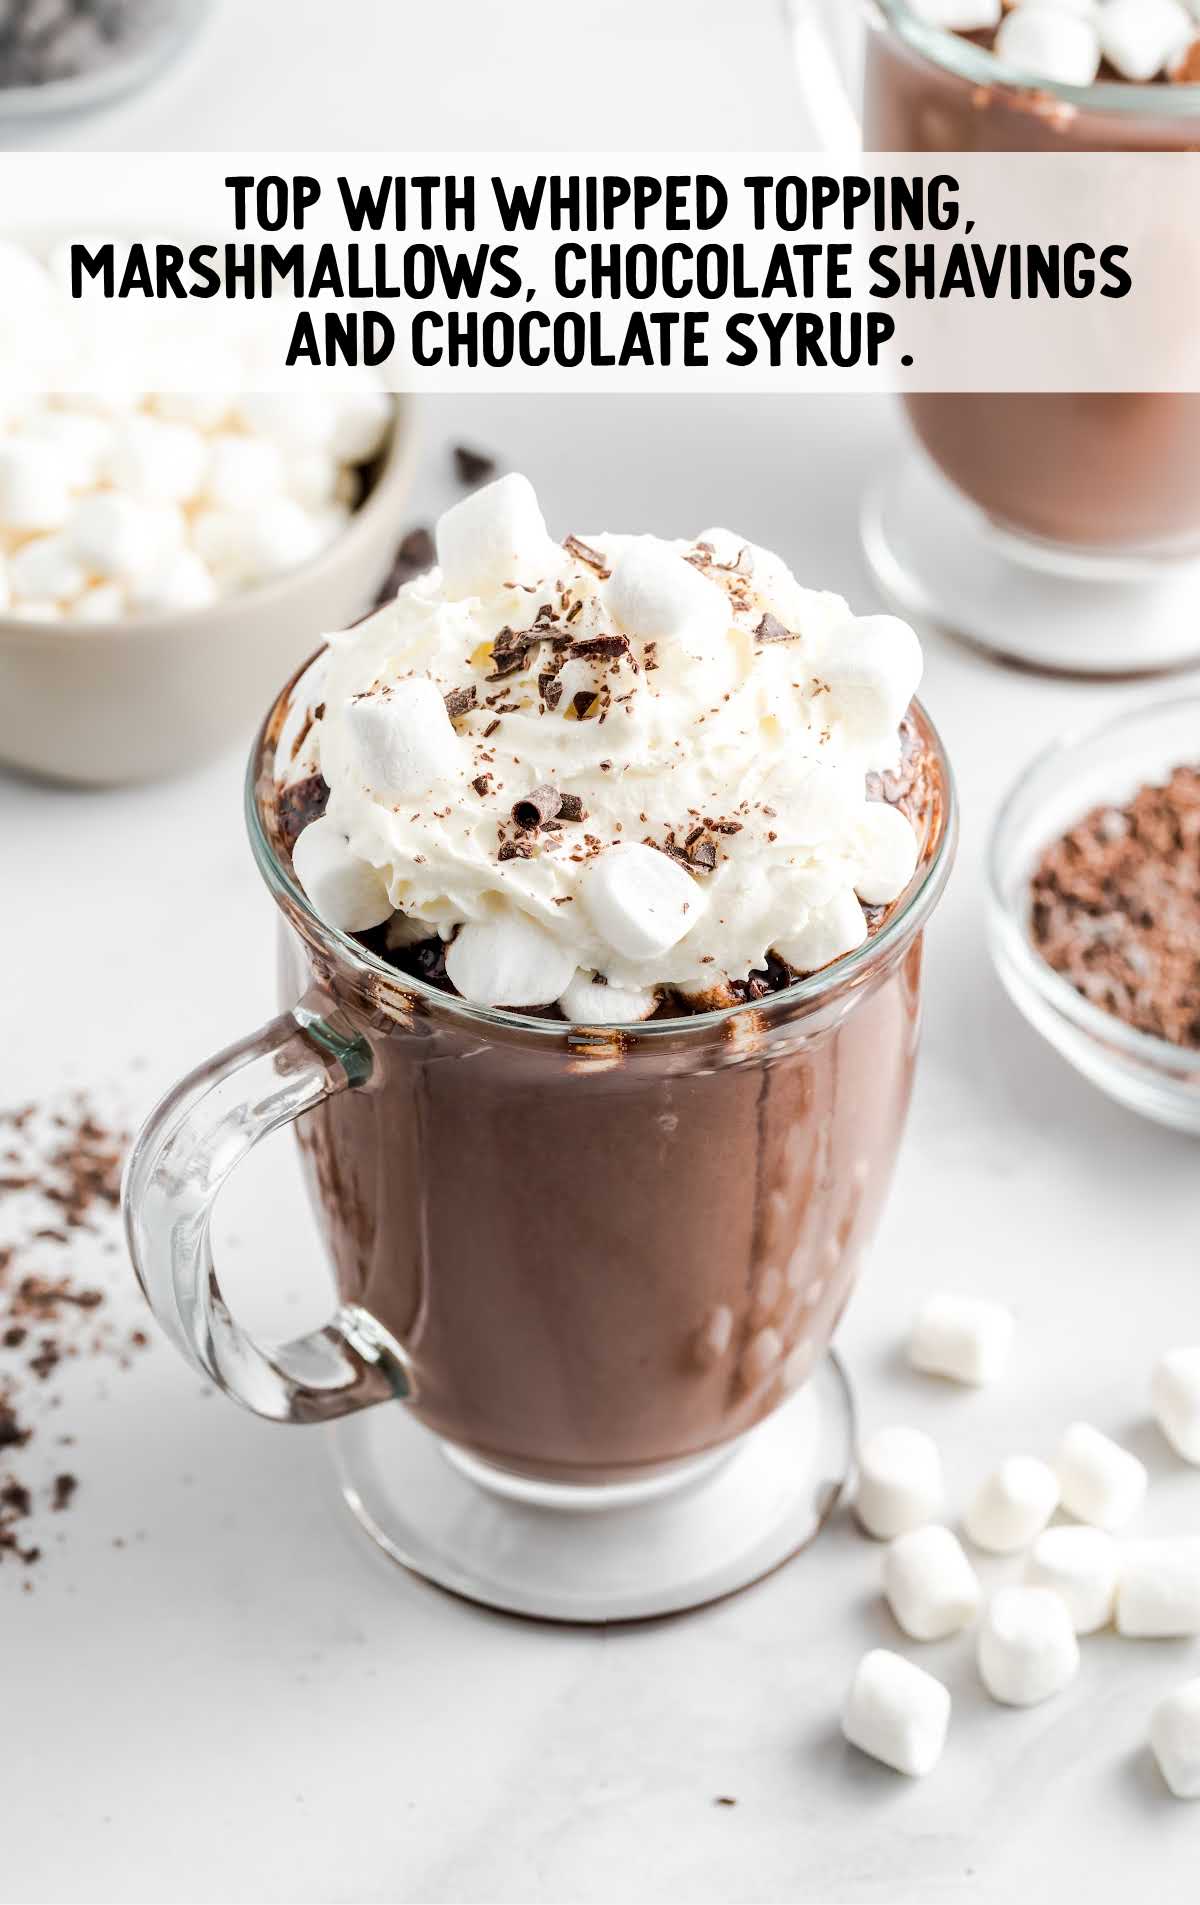 a glass of Hot Chocolate topped with whipped cream, marshmallows, chocolate shavings, and chocolate syrup